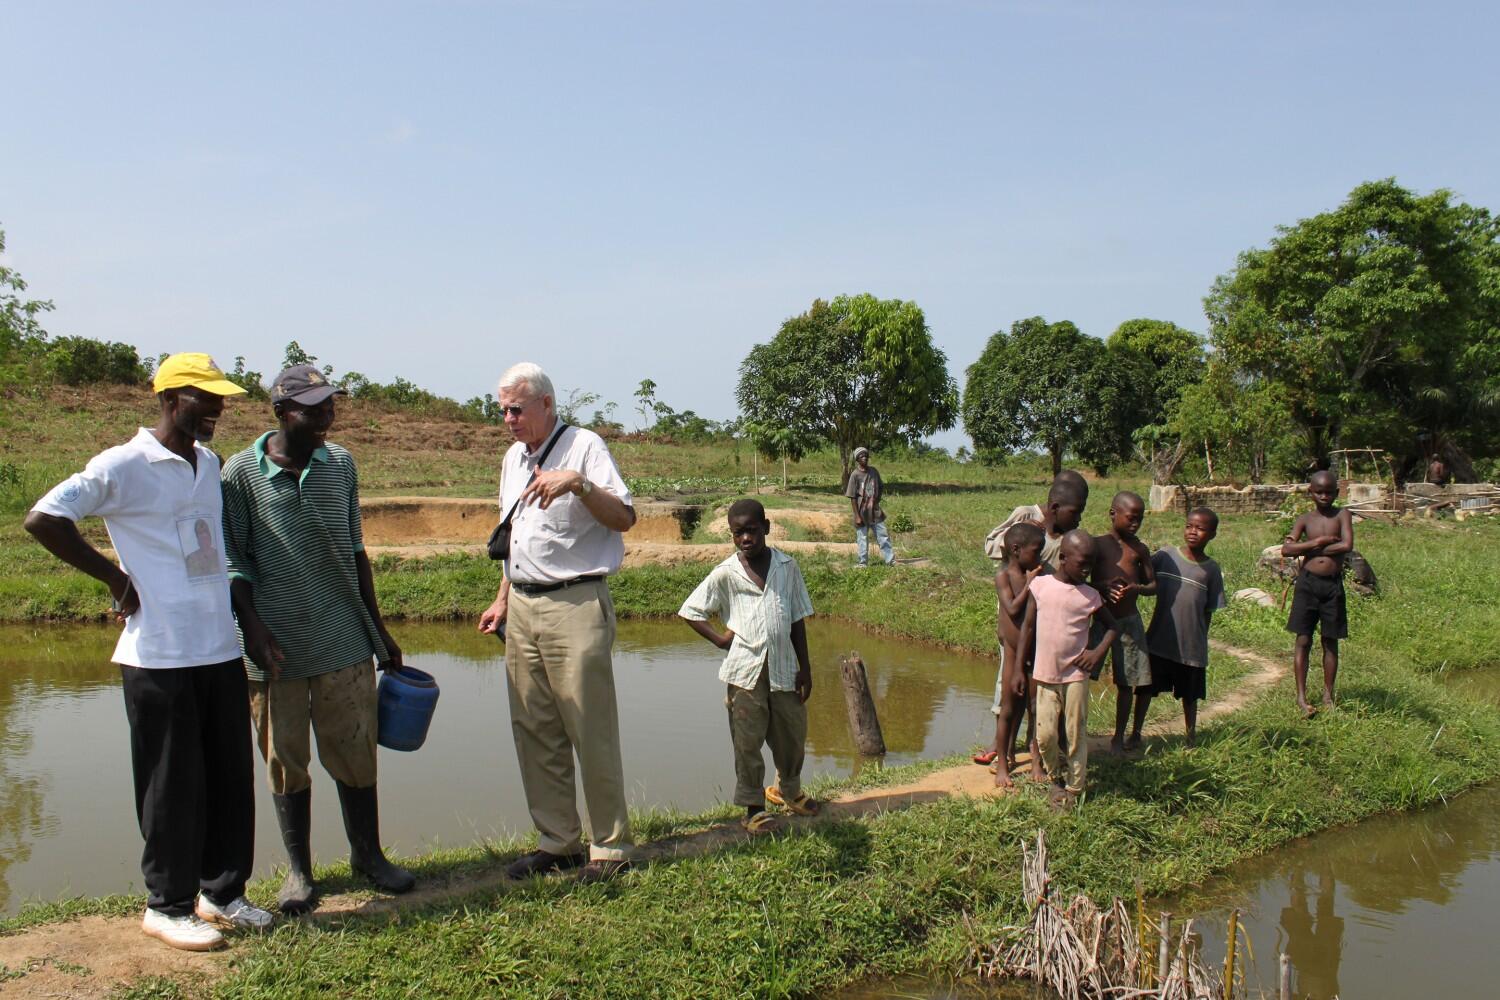 Remembering Burt Swanson, a passionate and influential advocate for smallholder farmers around the world 